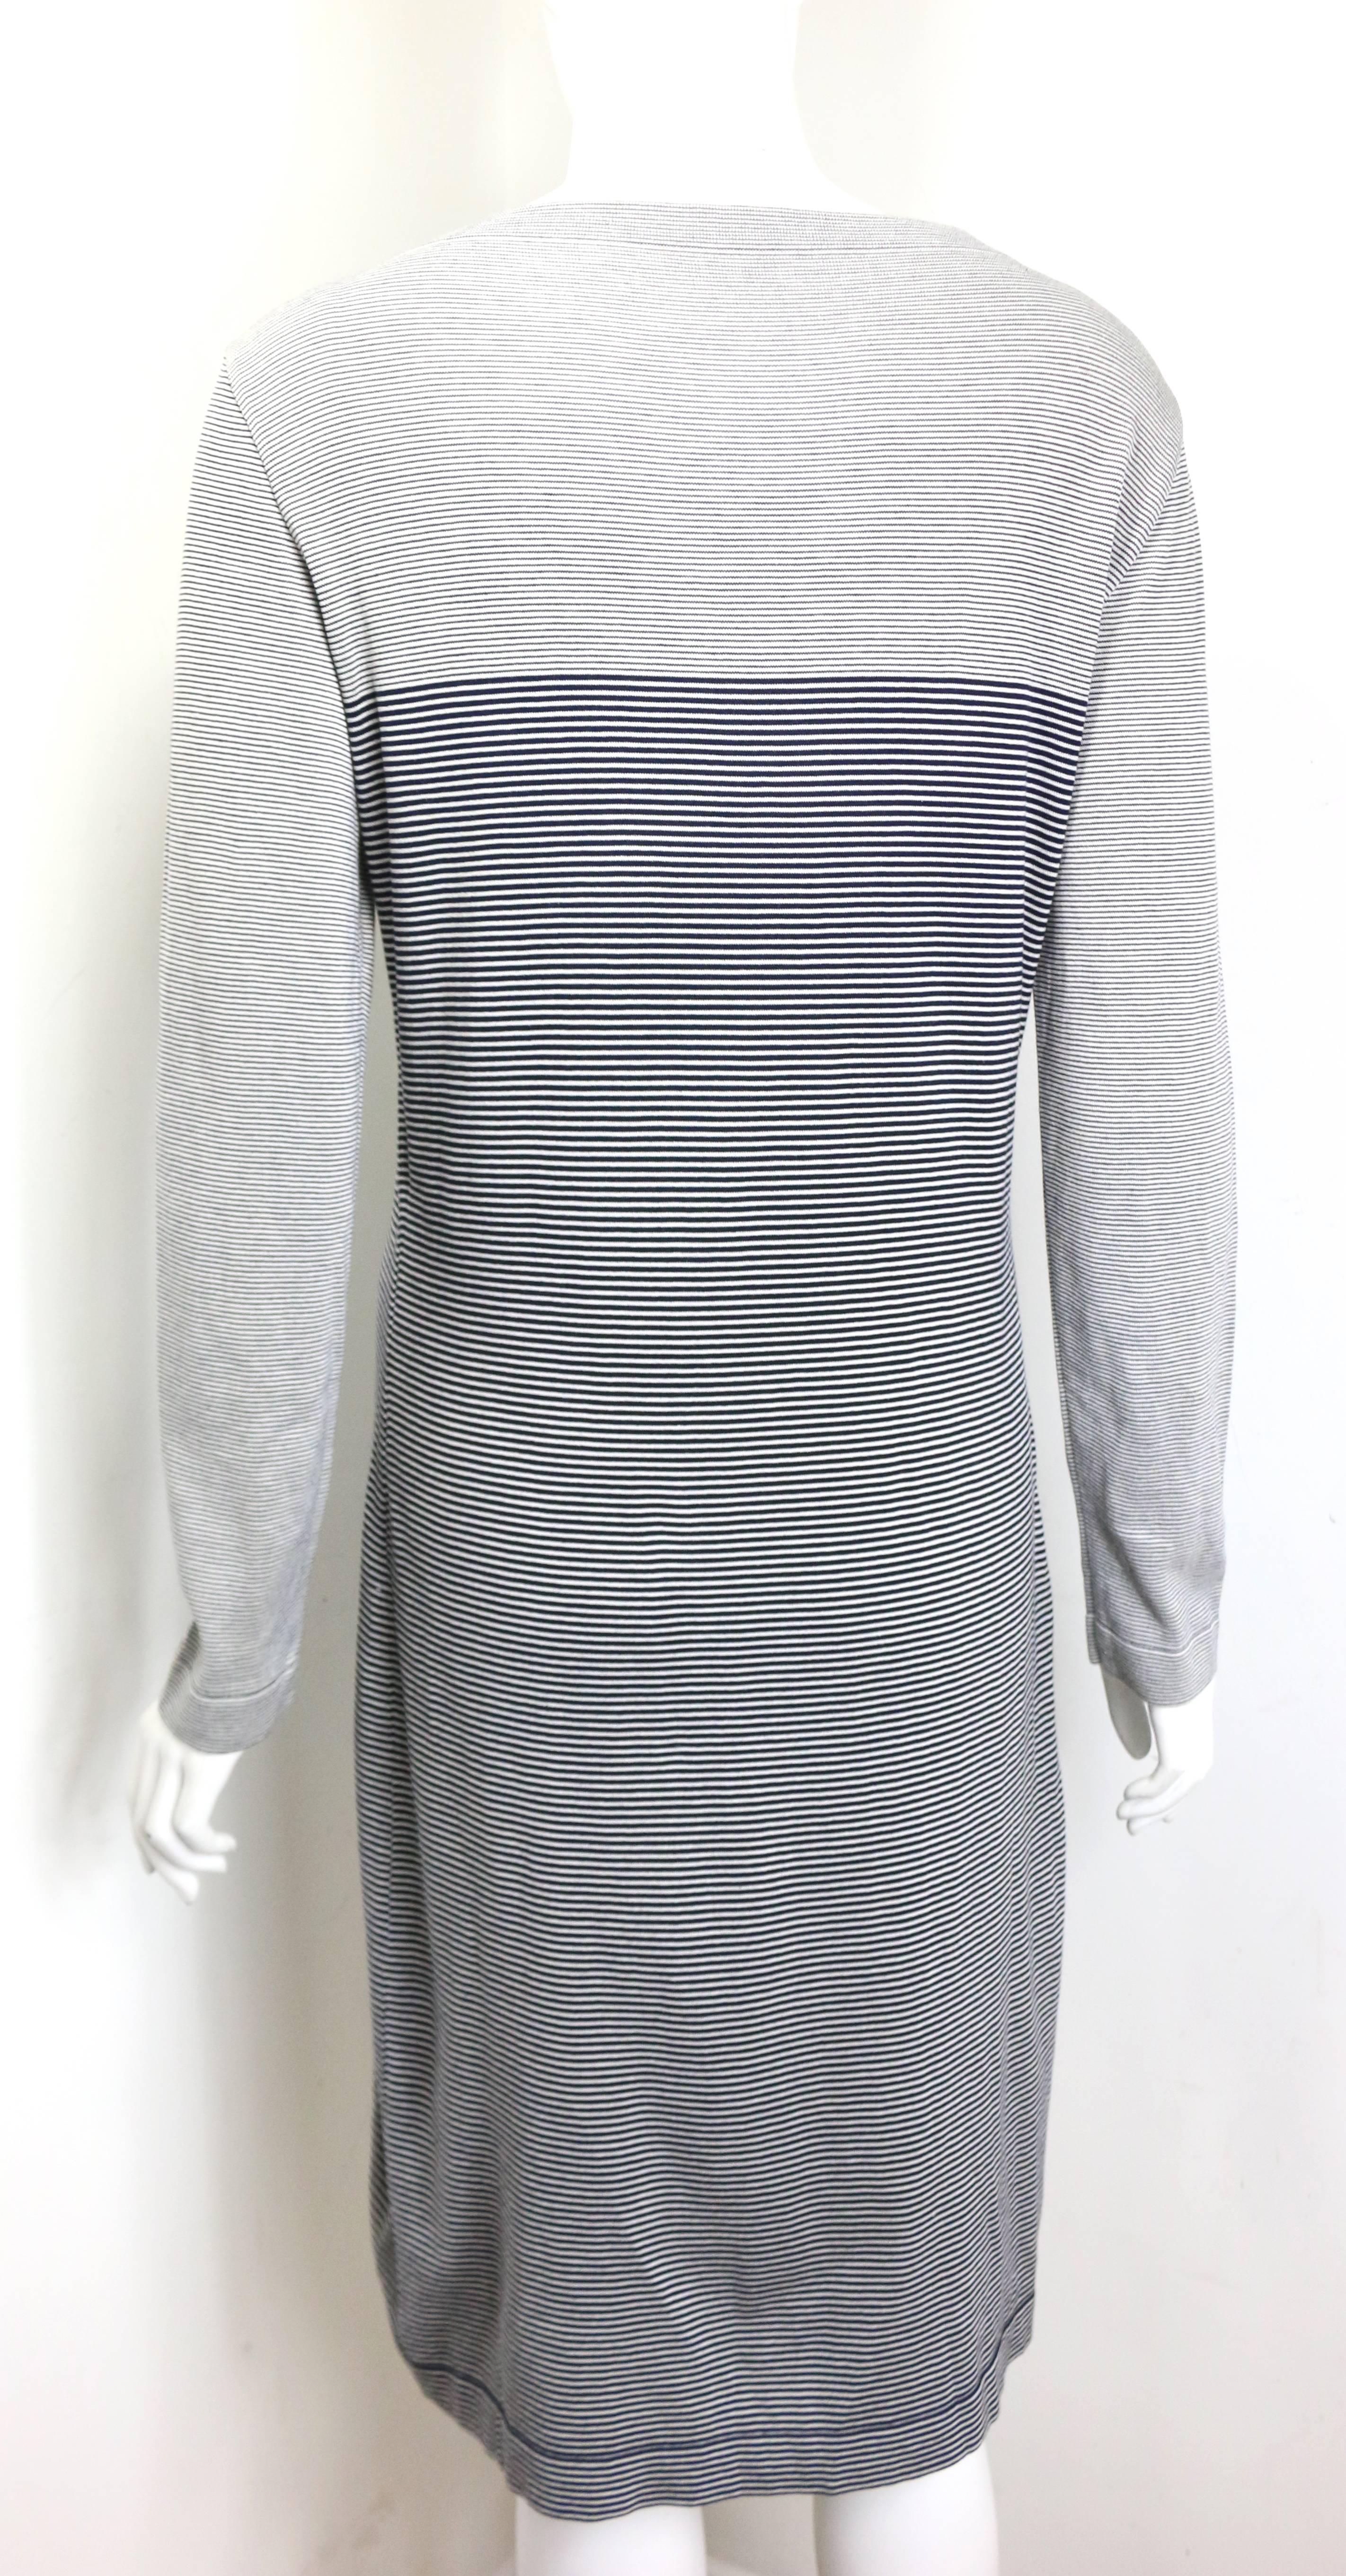 Chanel Black and White Stripe Cotton Long Sleeves Dress In Excellent Condition For Sale In Sheung Wan, HK